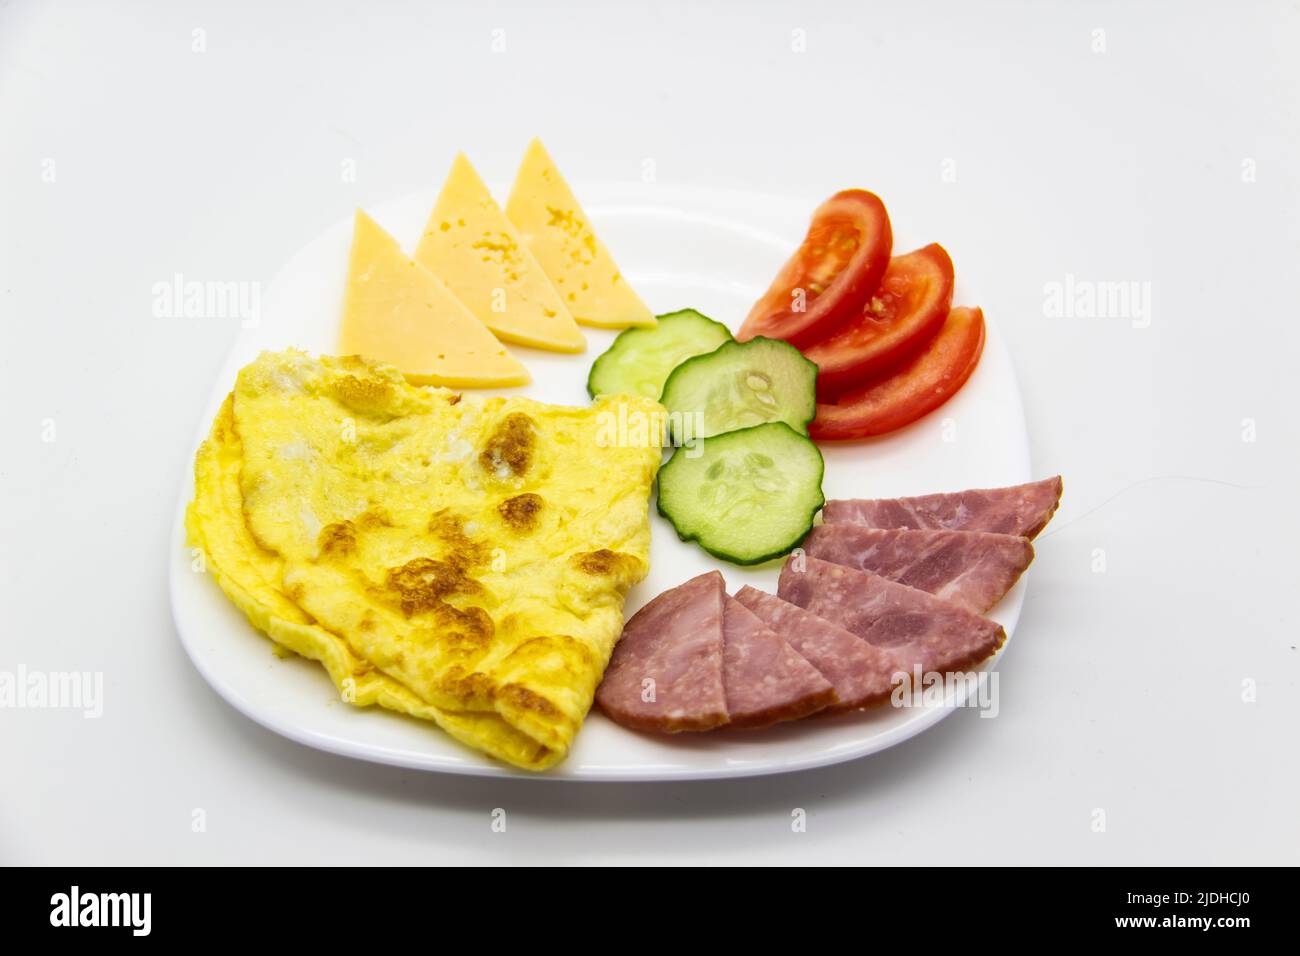 Tasty breakfast or lunch with omelet with sausage, tomato, cucumber, and pieces of cheese on the white plate. Stock Photo